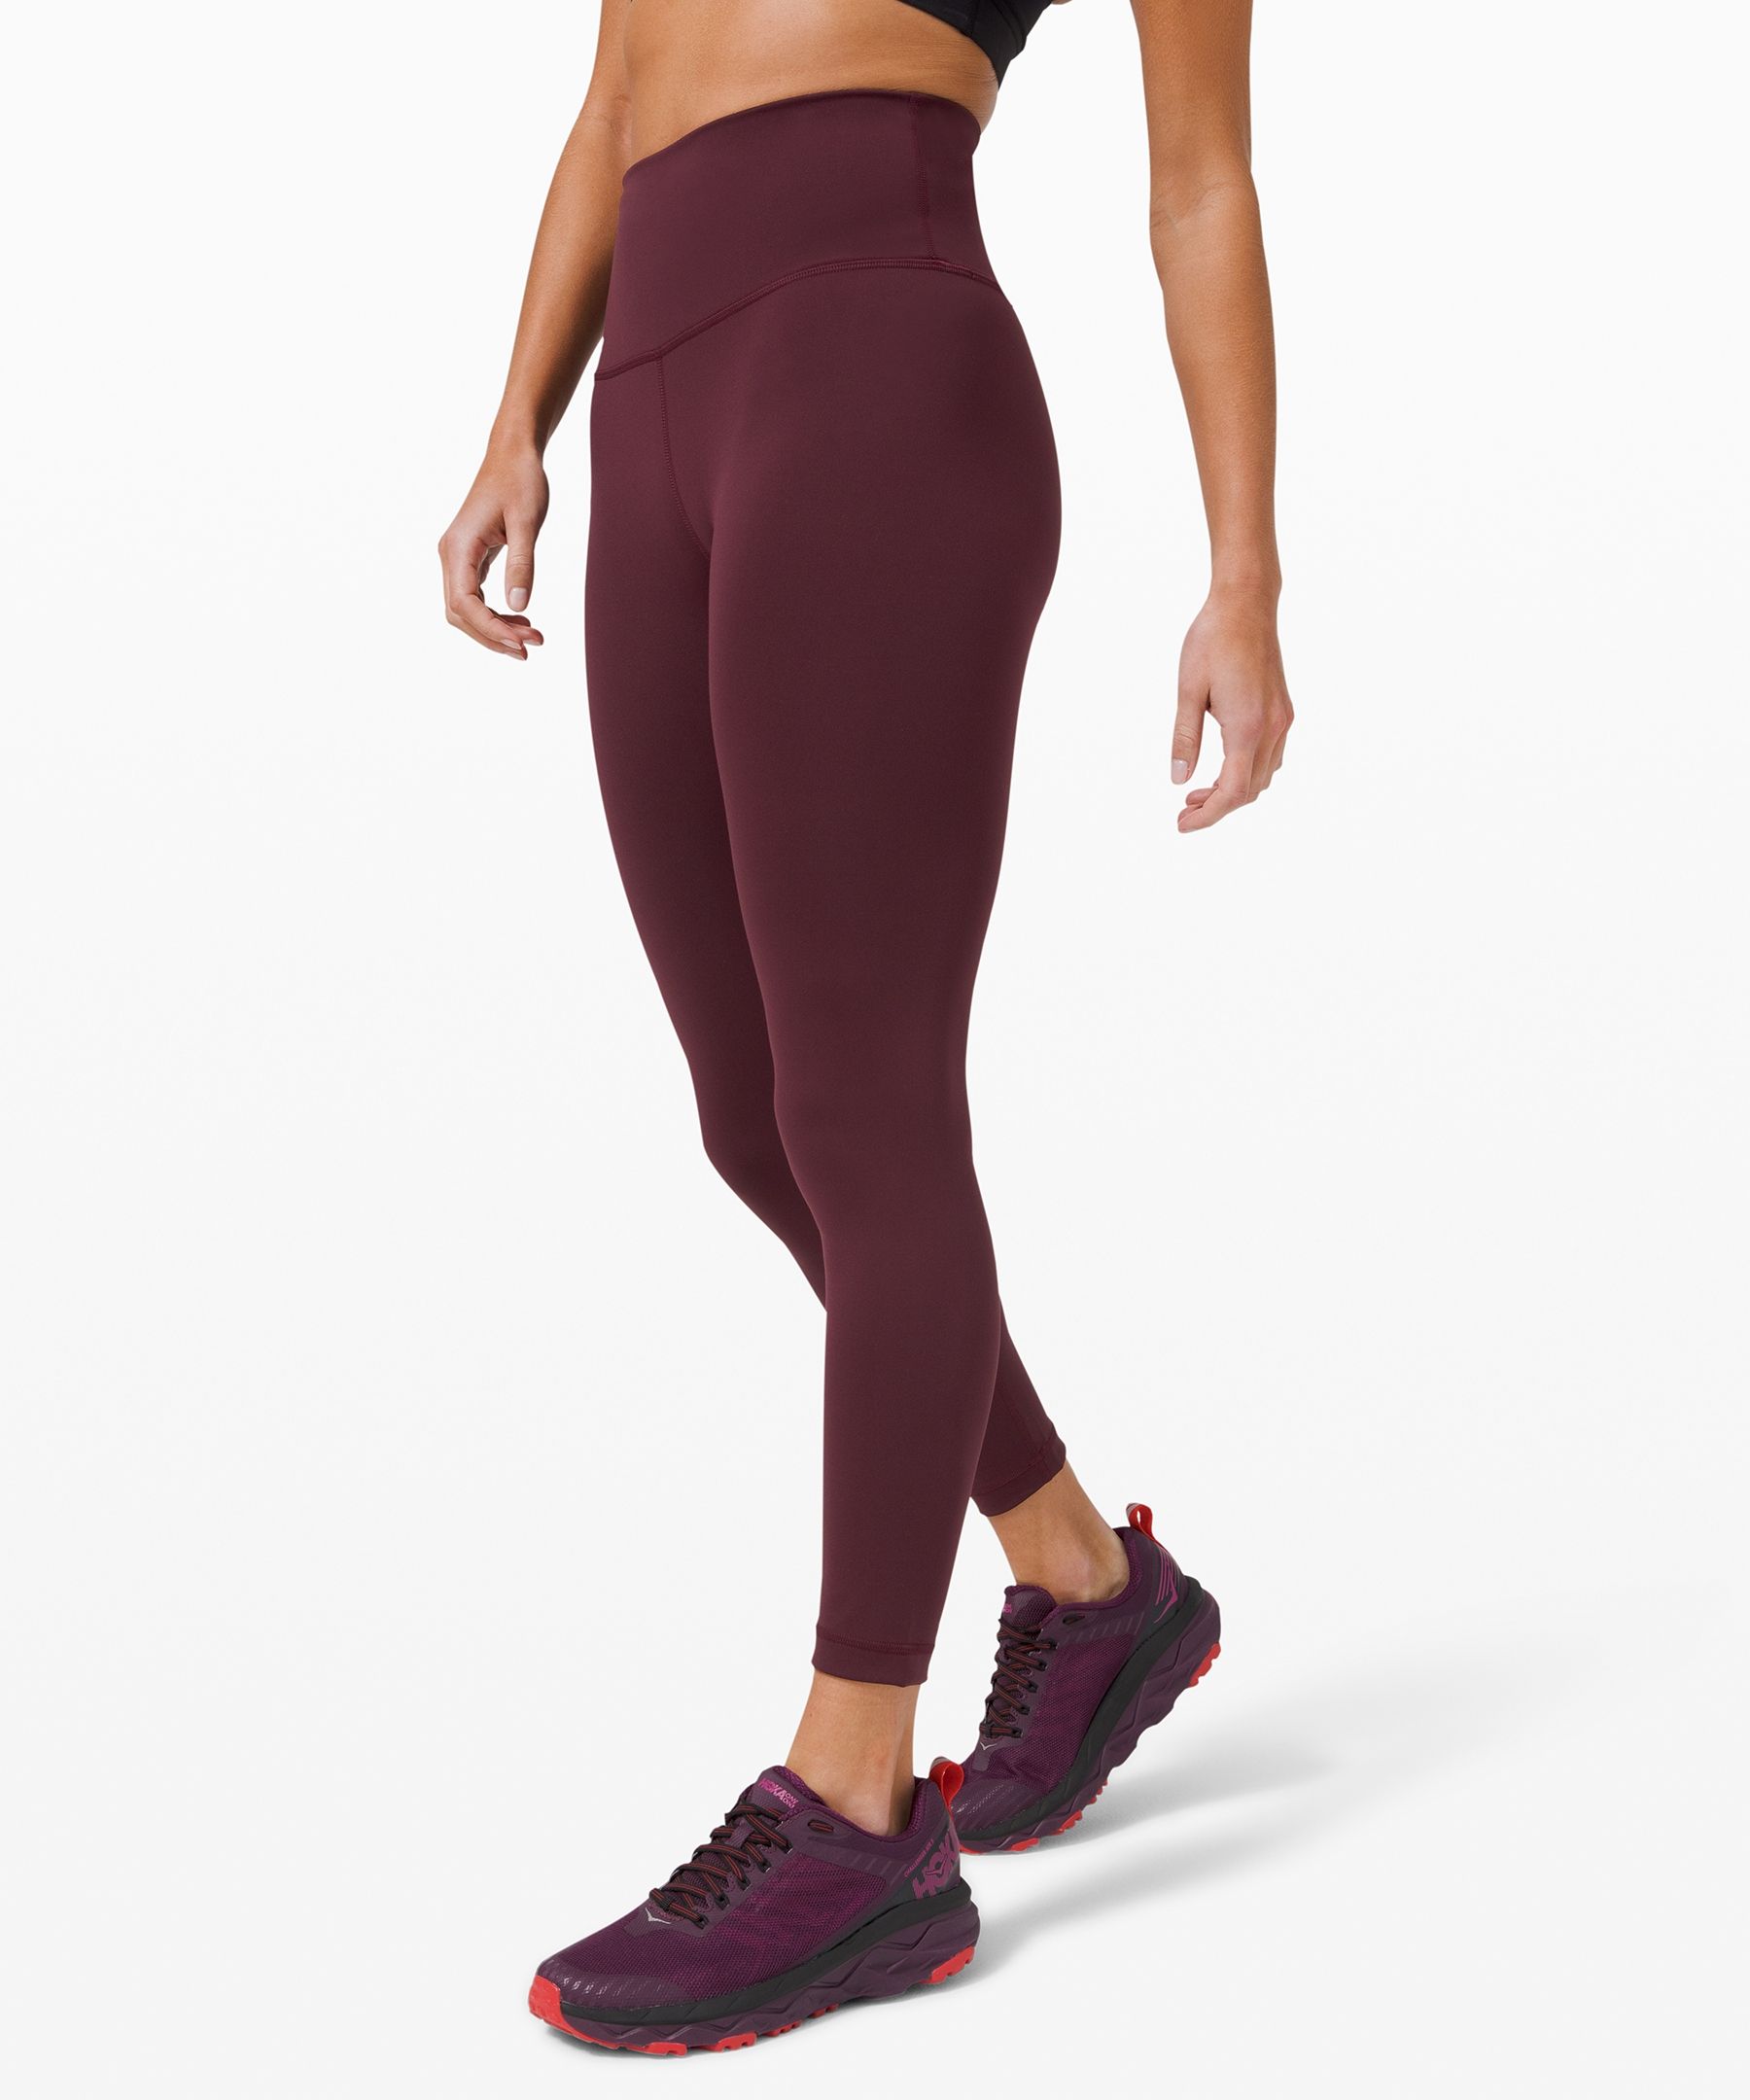 what are the classic lululemon leggings called